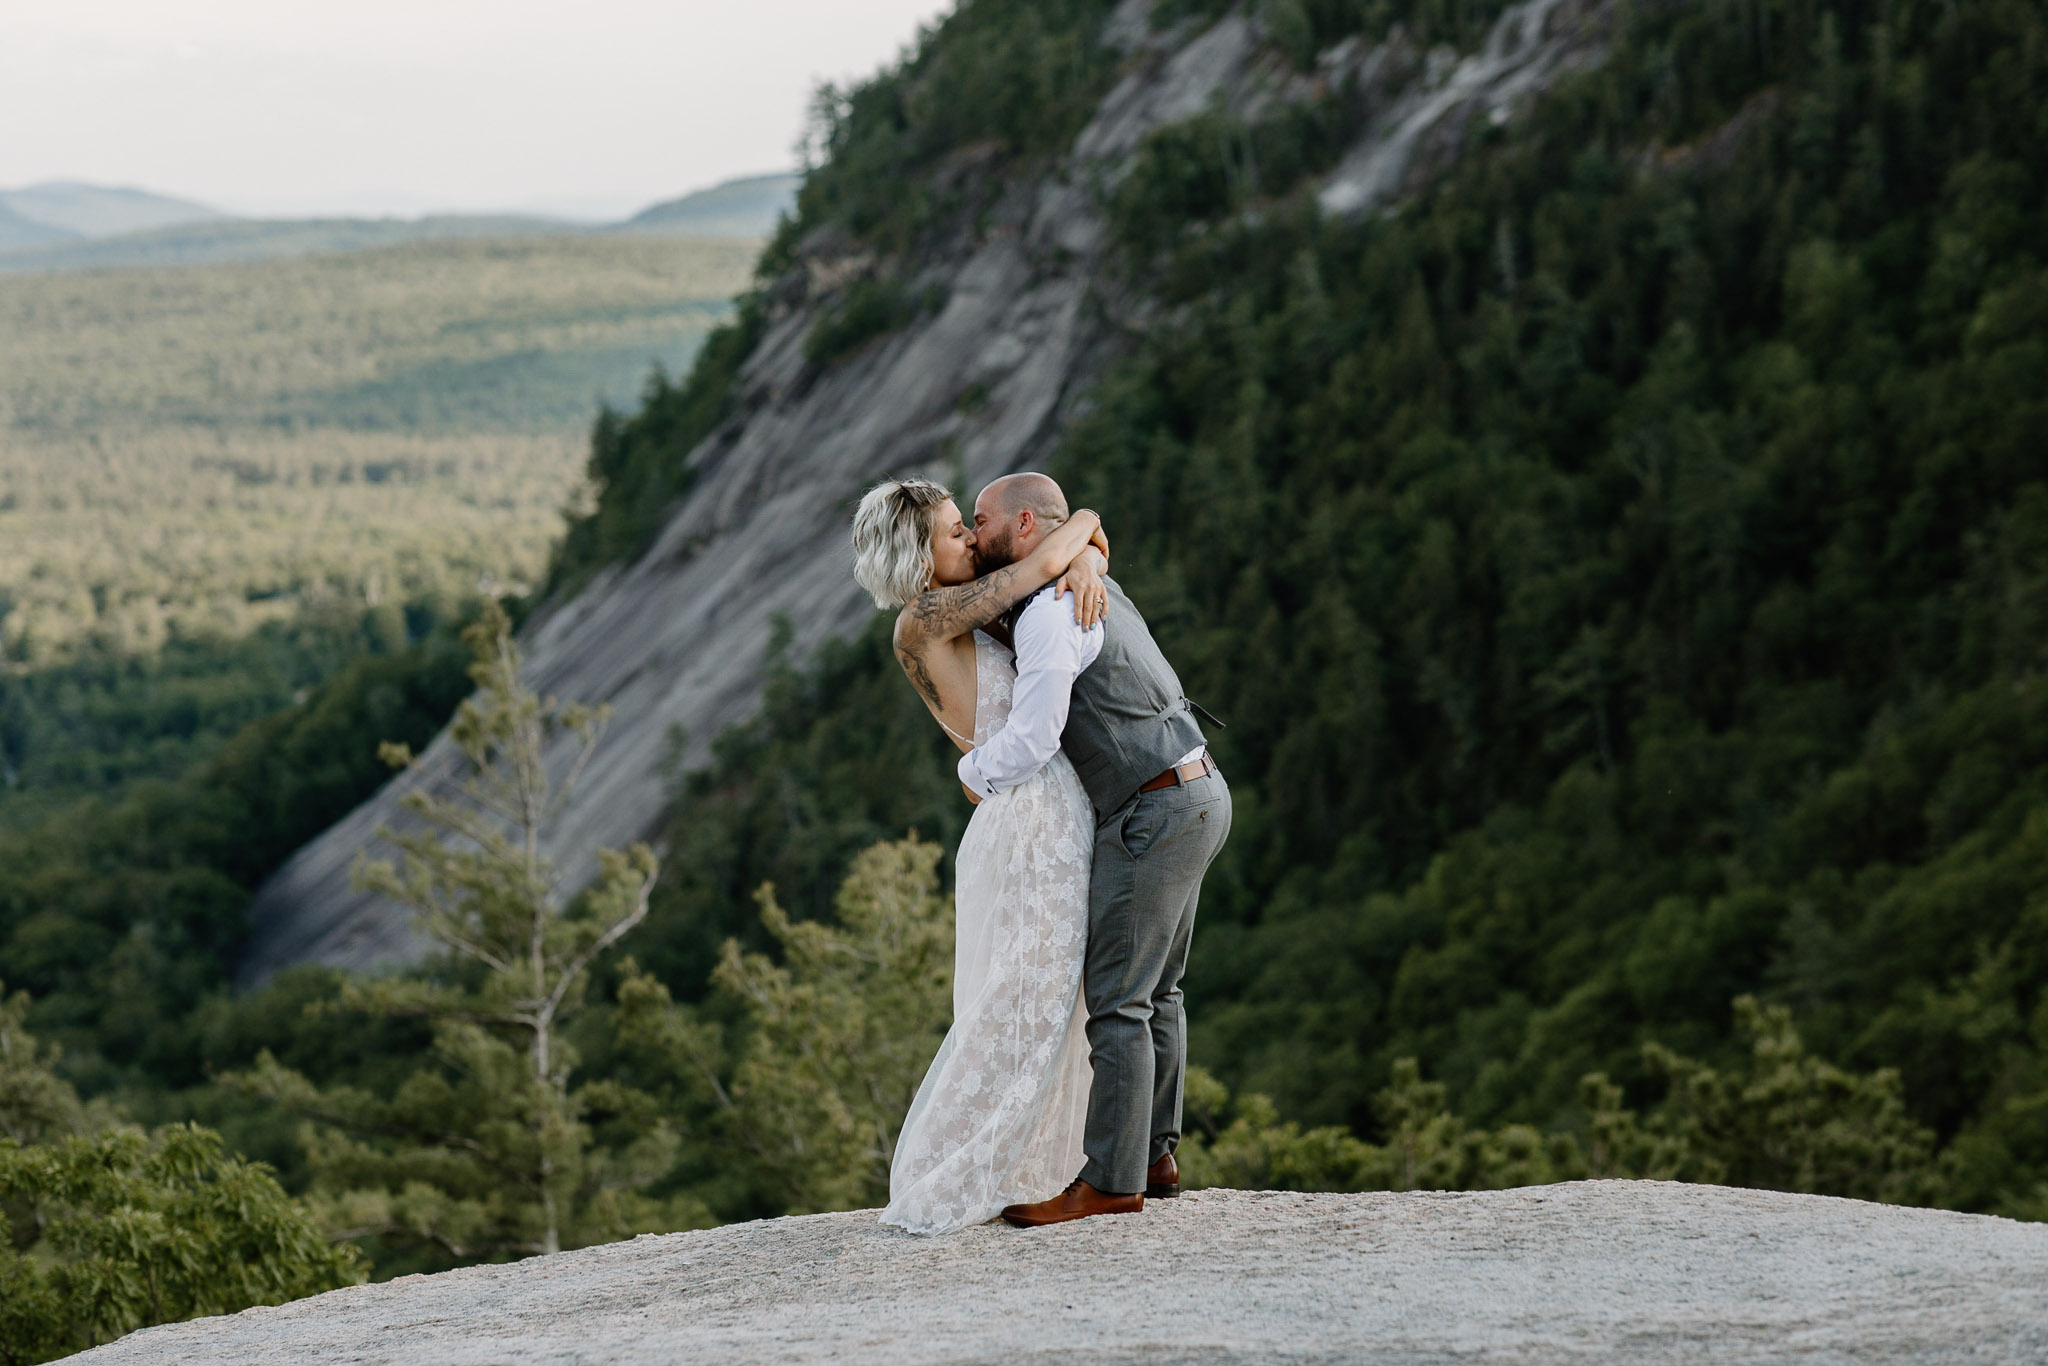 Best places to elope in New Hampshire